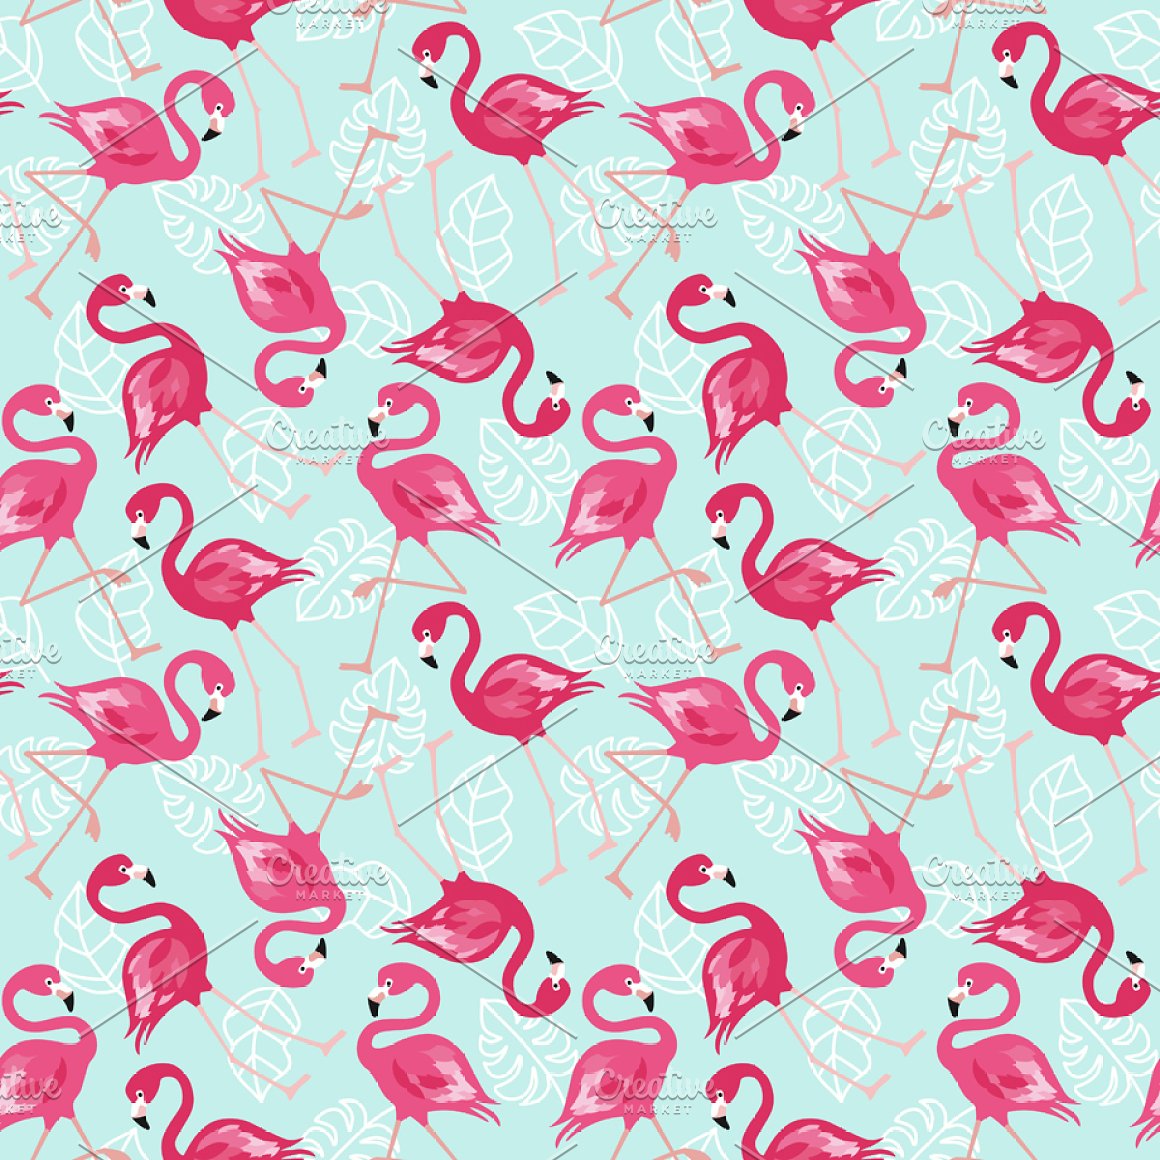 This is a nice flamingo set for your home.